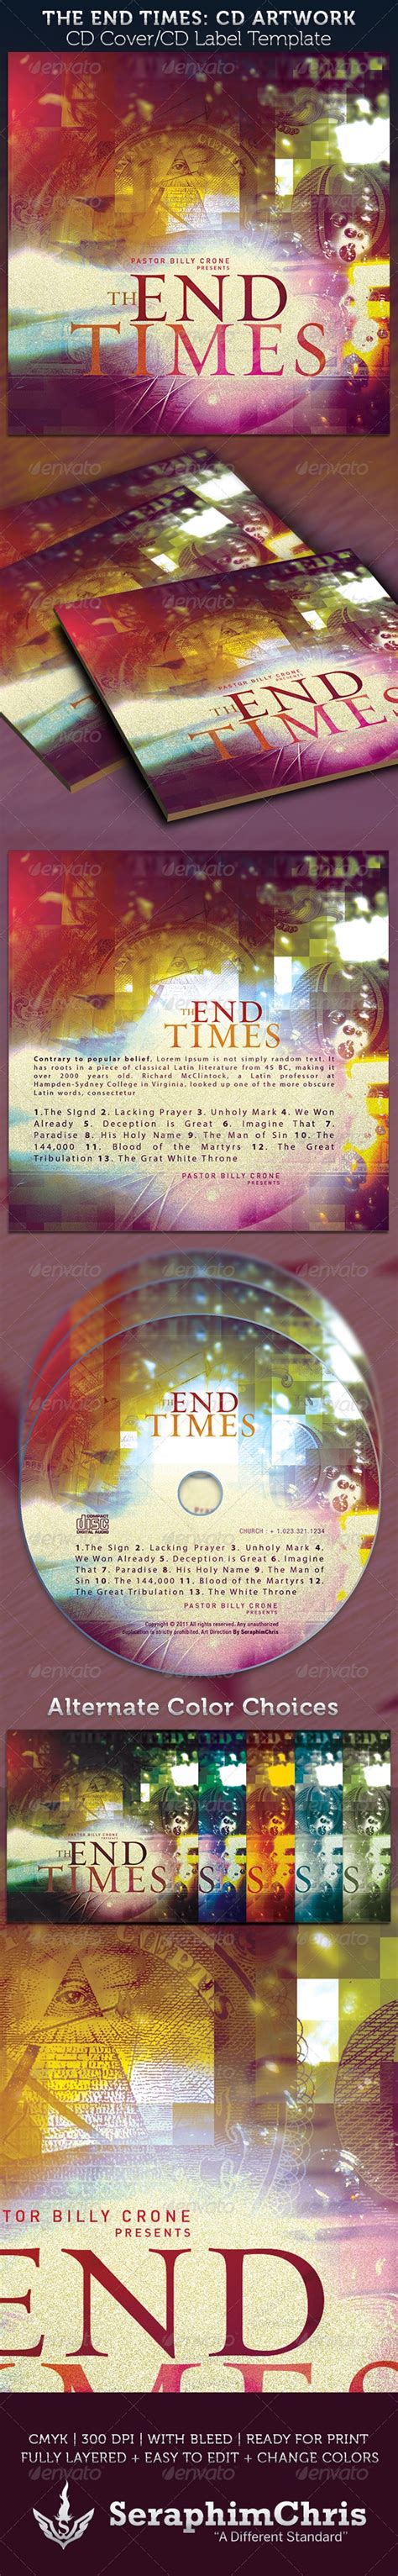 The End Times Cd Cover Artwork Template By Seraphimchris Graphicriver